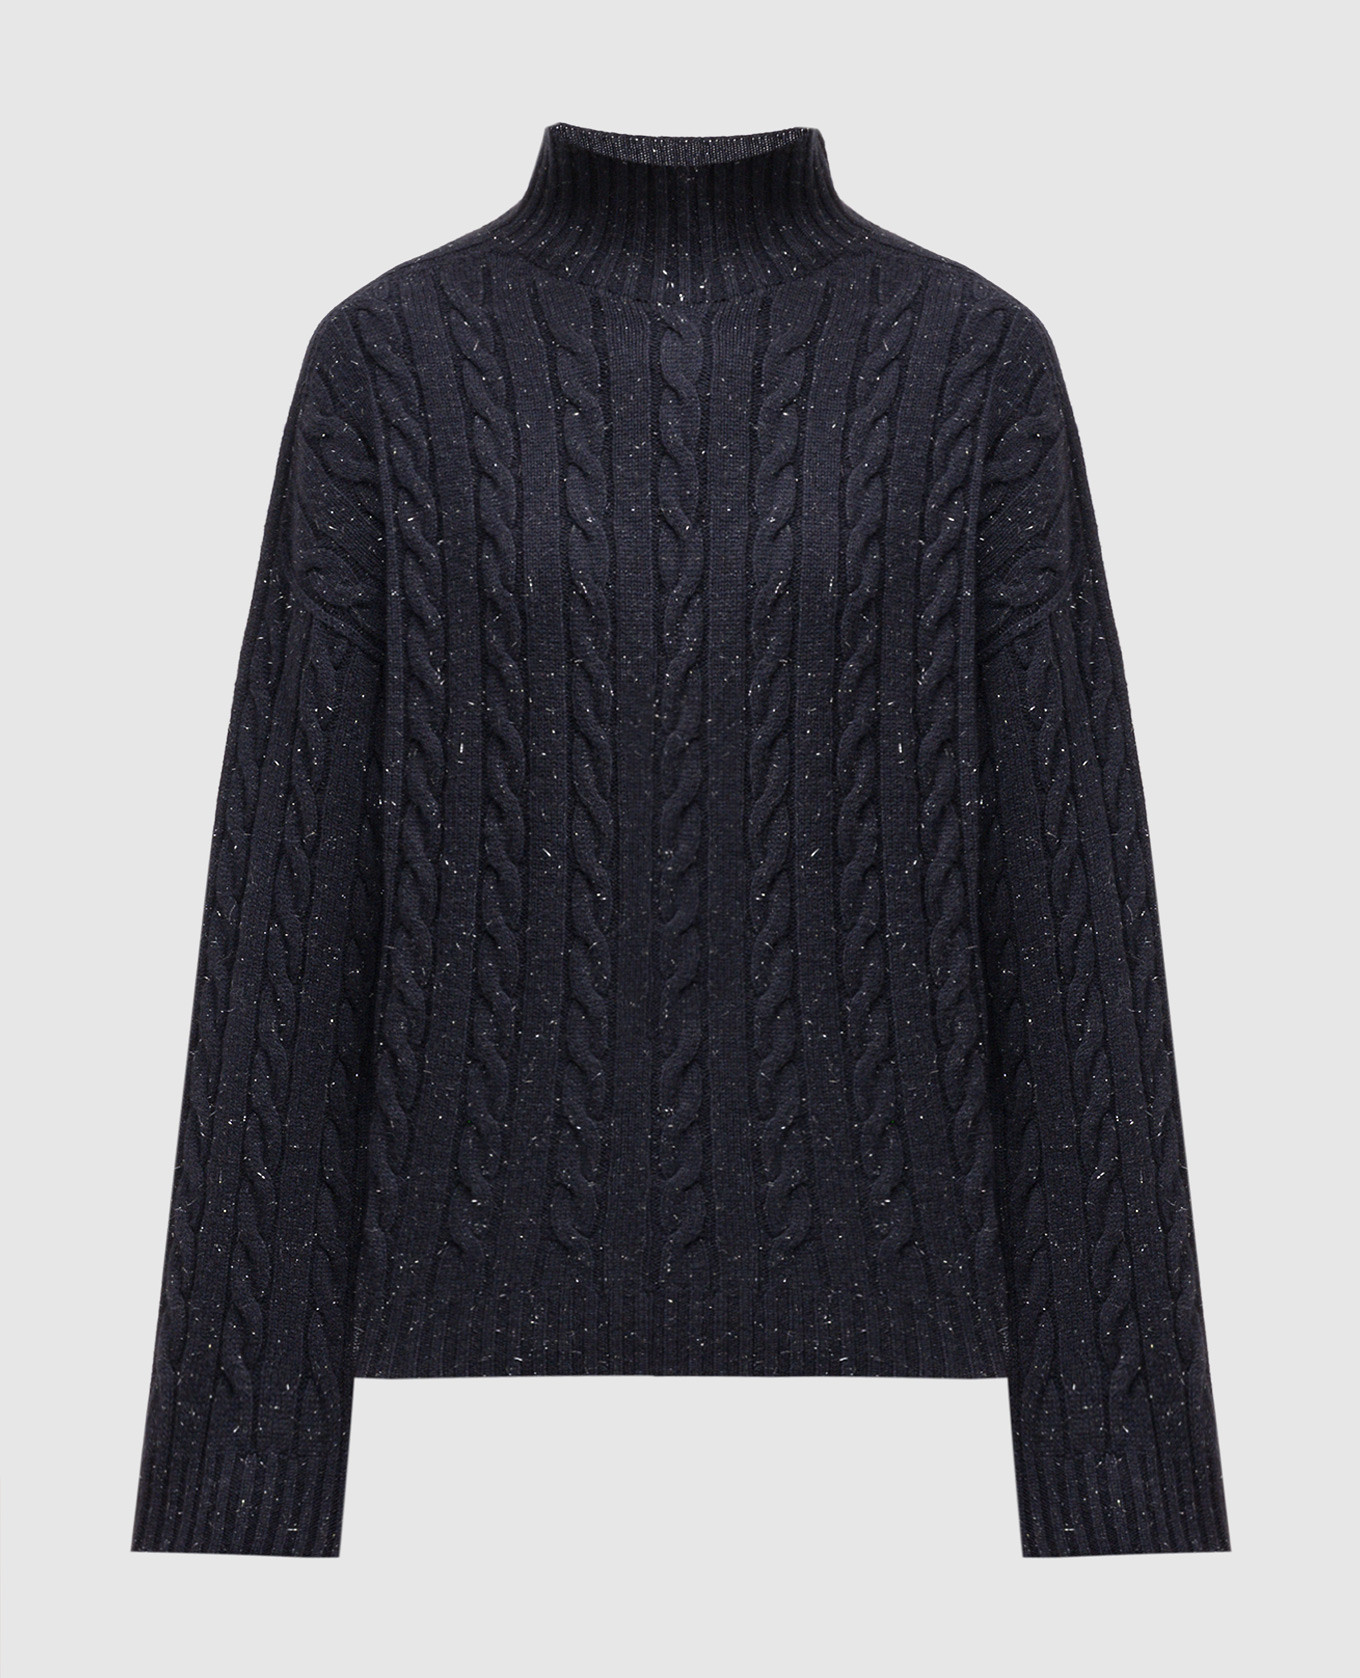 Blue sweater with wool, silk and cashmere in a textured pattern with lurex